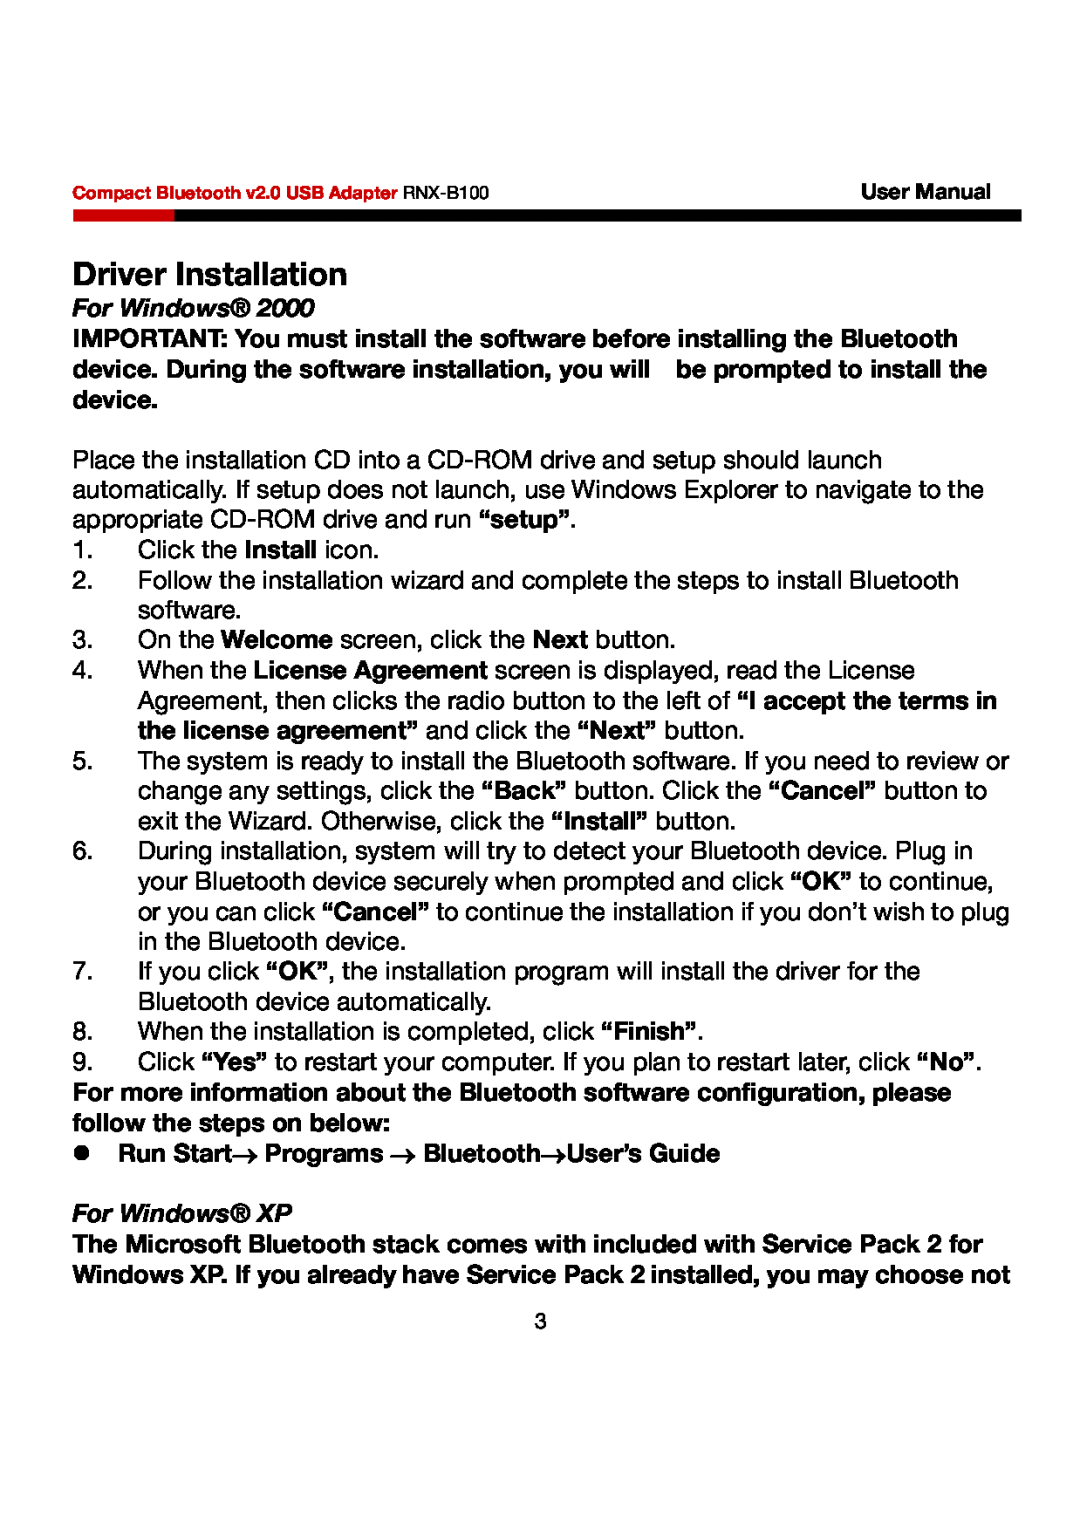 Rosewill RNX-B100 user manual Driver Installation, For Windows XP 